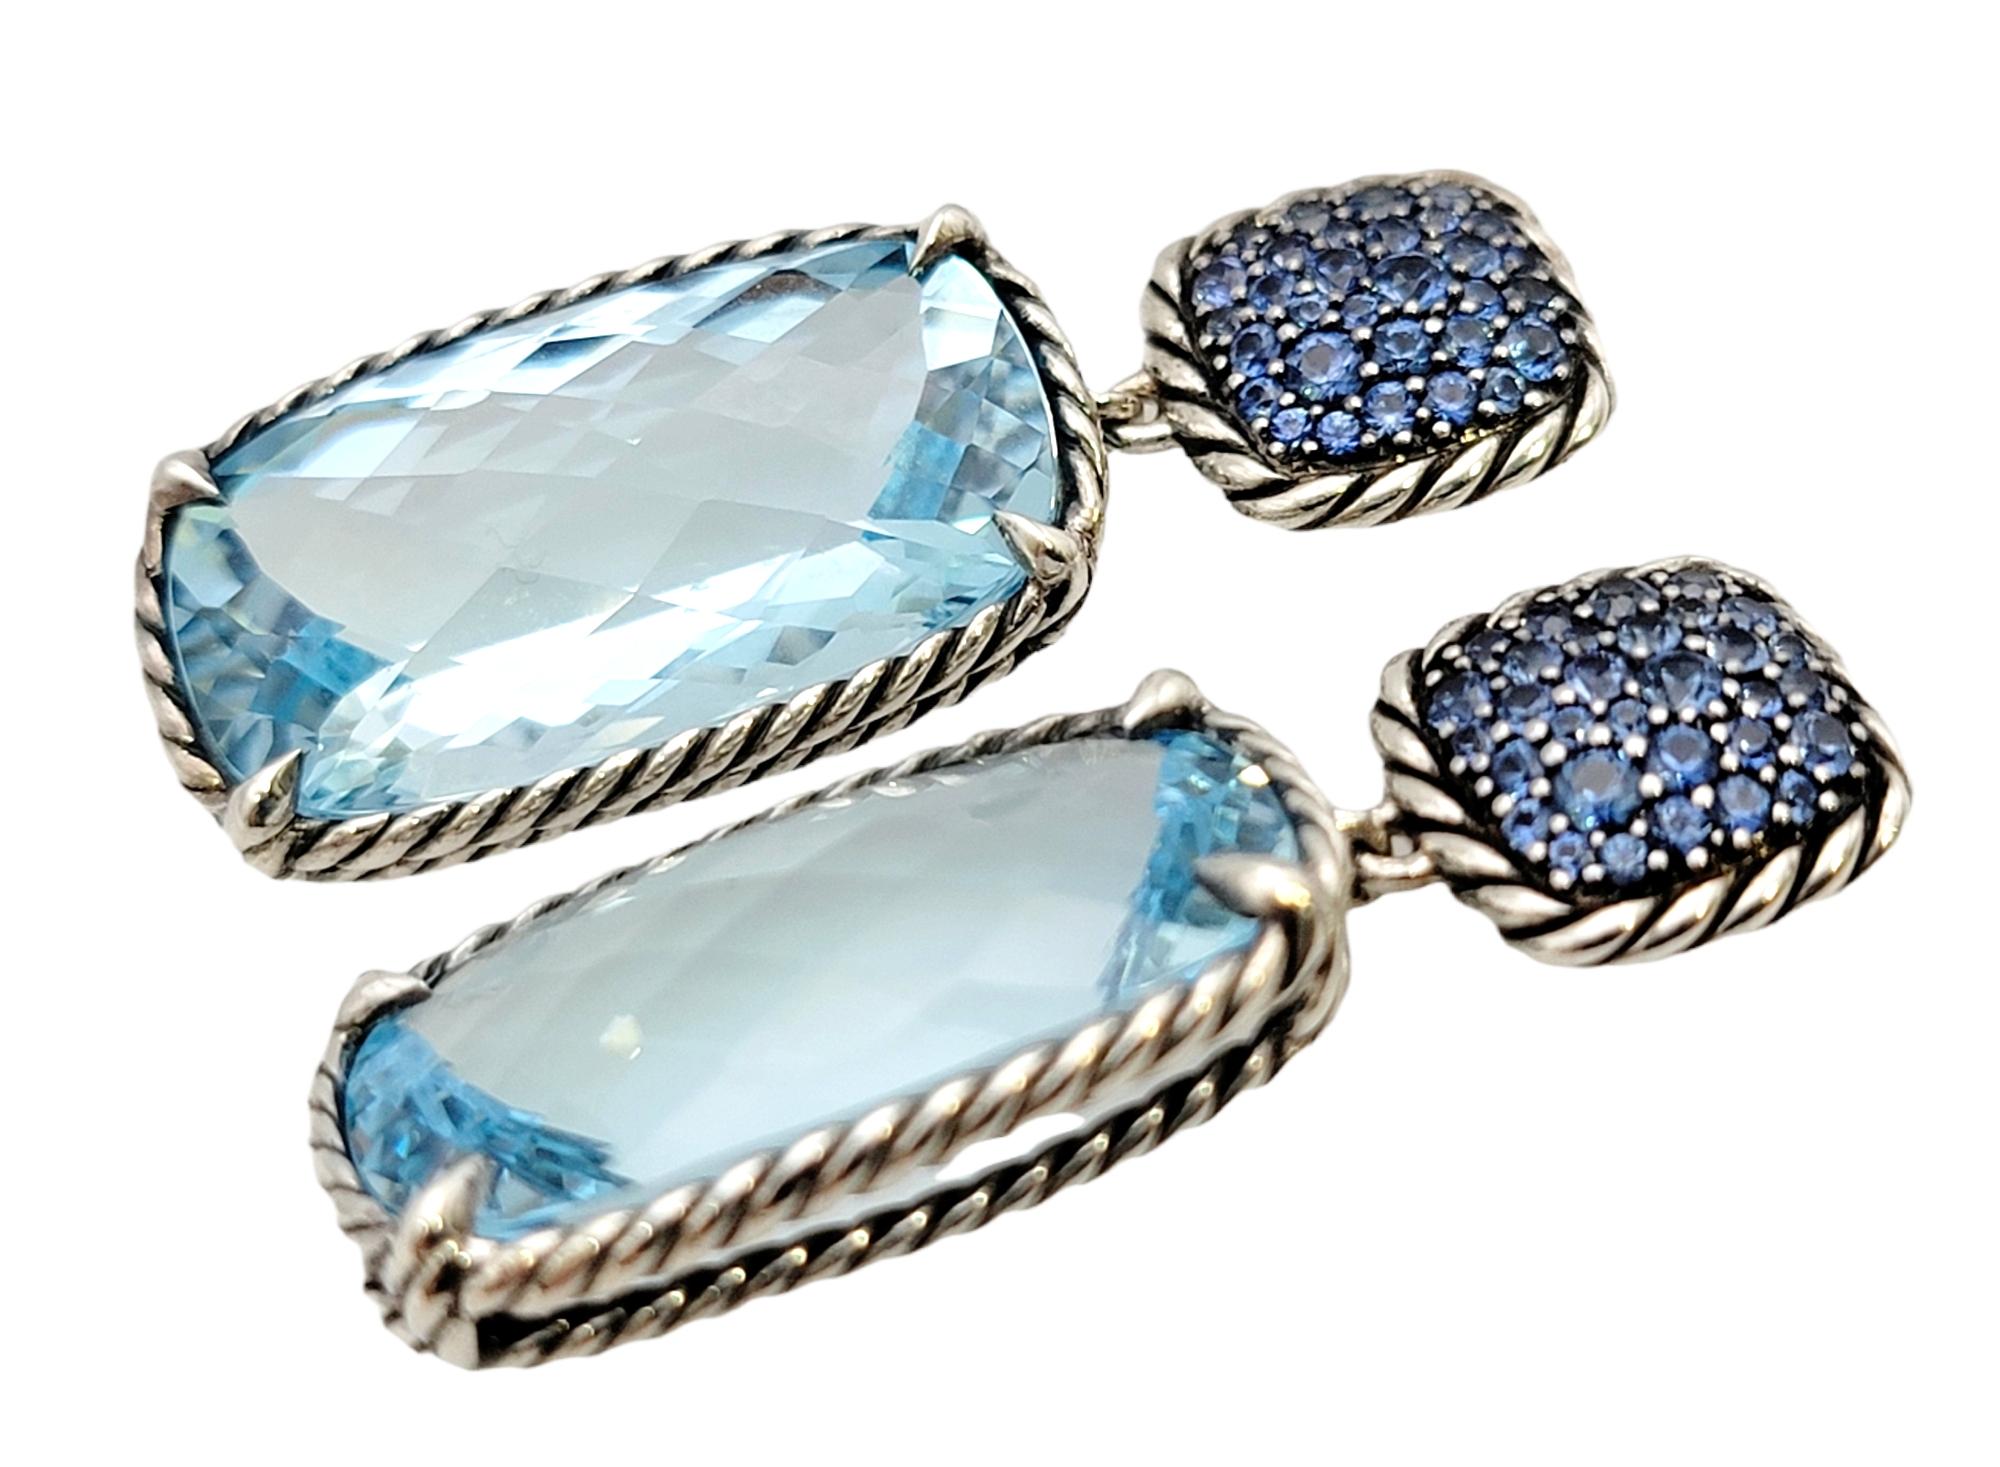 If you are a lover of blue, these are the earrings for you! Natural blue topaz and blue sapphire gemstones fill these gorgeous David Yurman earrings with magnificent sparkle and color. The varying shades of blue compliment each other beautifully,